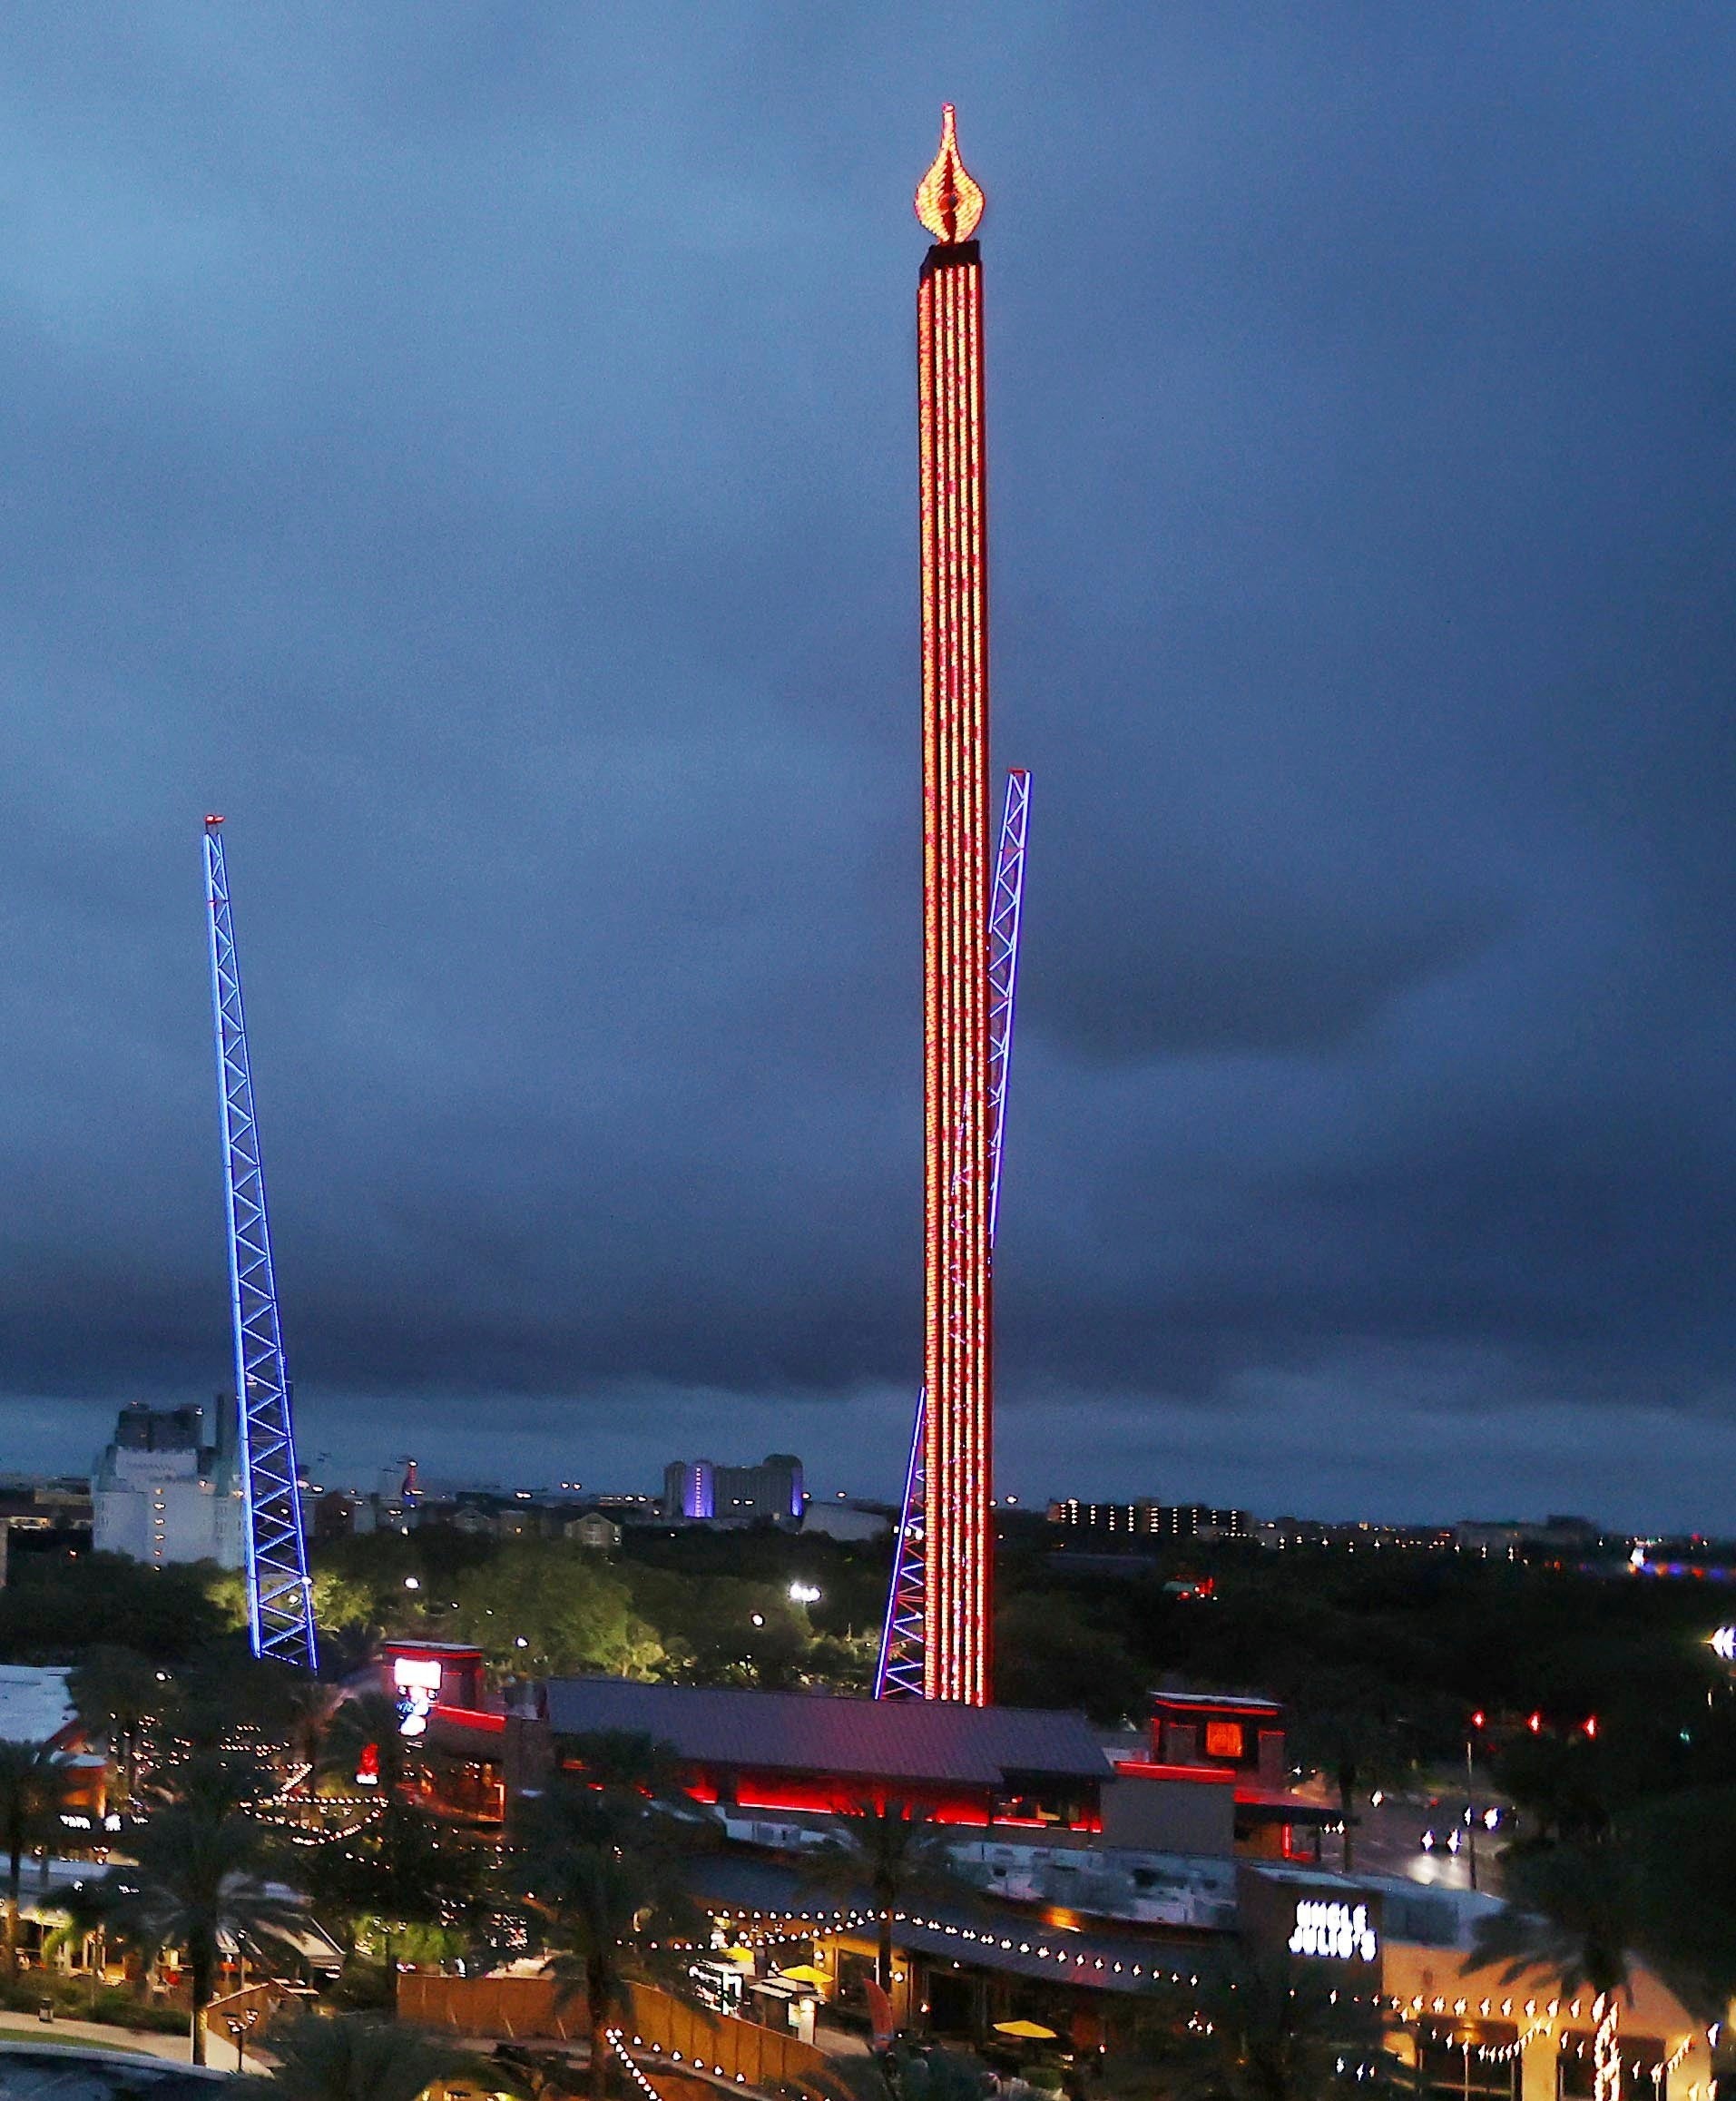 The Free Fall ride in Orlando which was the site of the tragedy